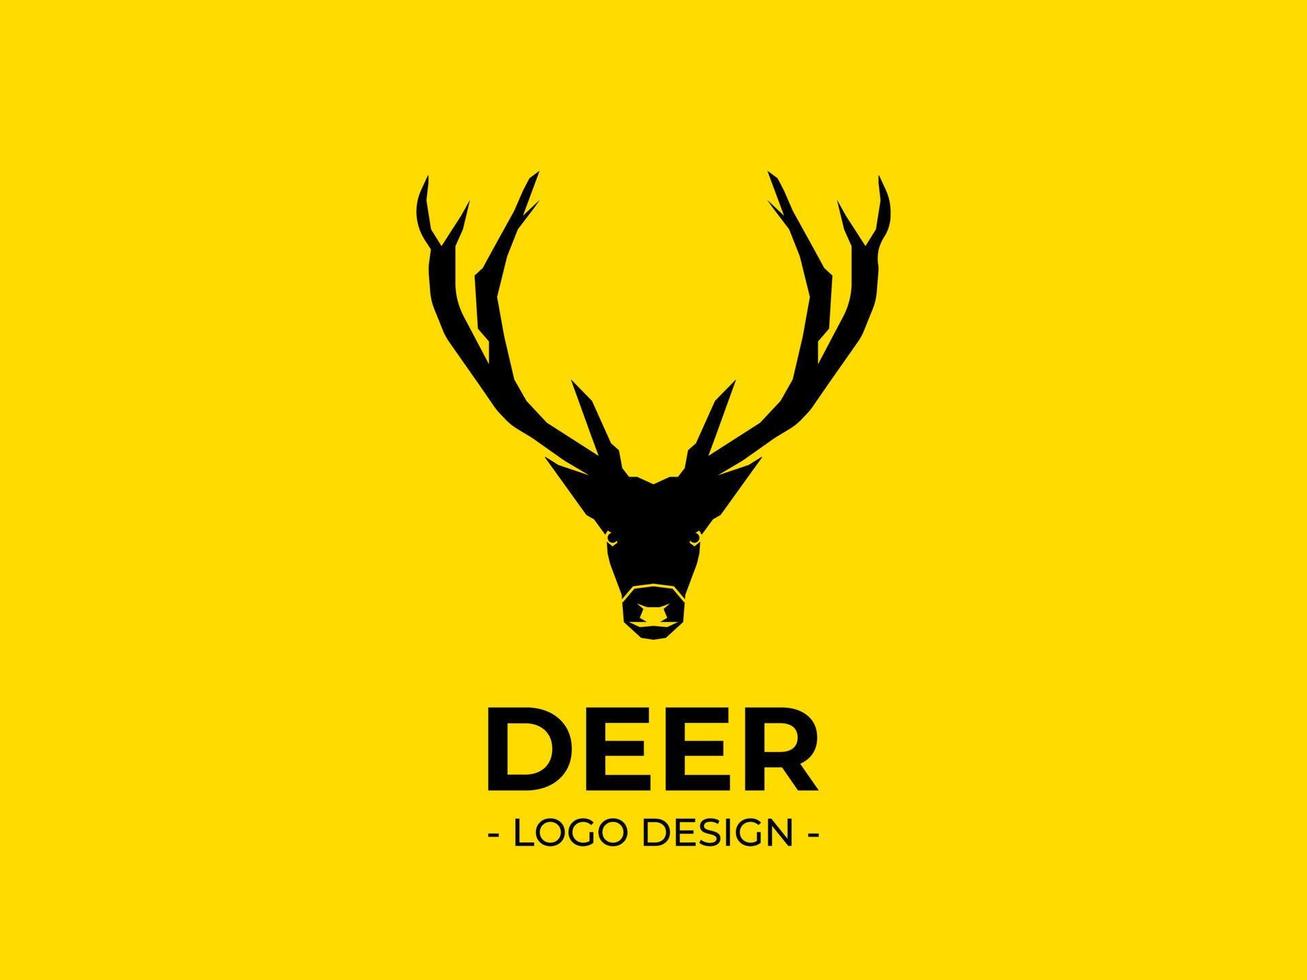 The black deer logo design with a yellow background is suitable to be used as a company logo or as a logo design reference. vector